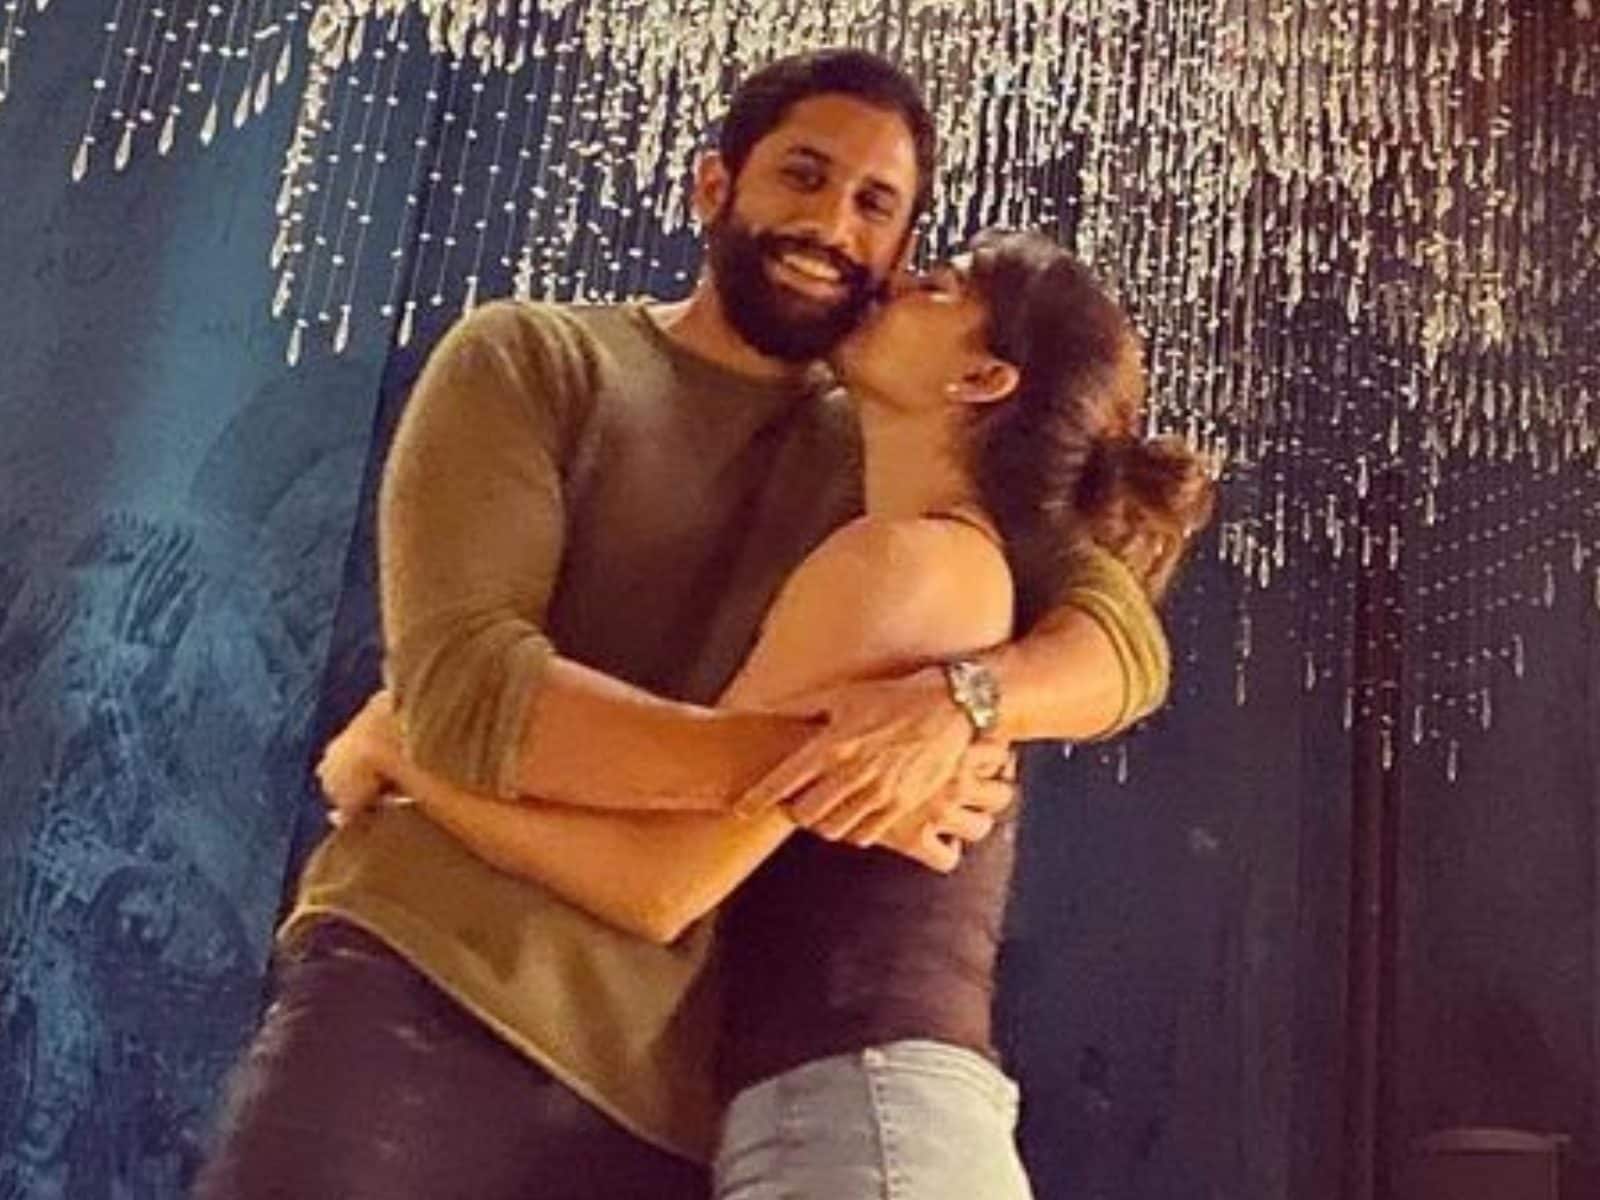 Samantha Ruth Prabhu deletes nearly all Instagram pictures with Naga  Chaitanya, weeks after separation - Hindustan Times